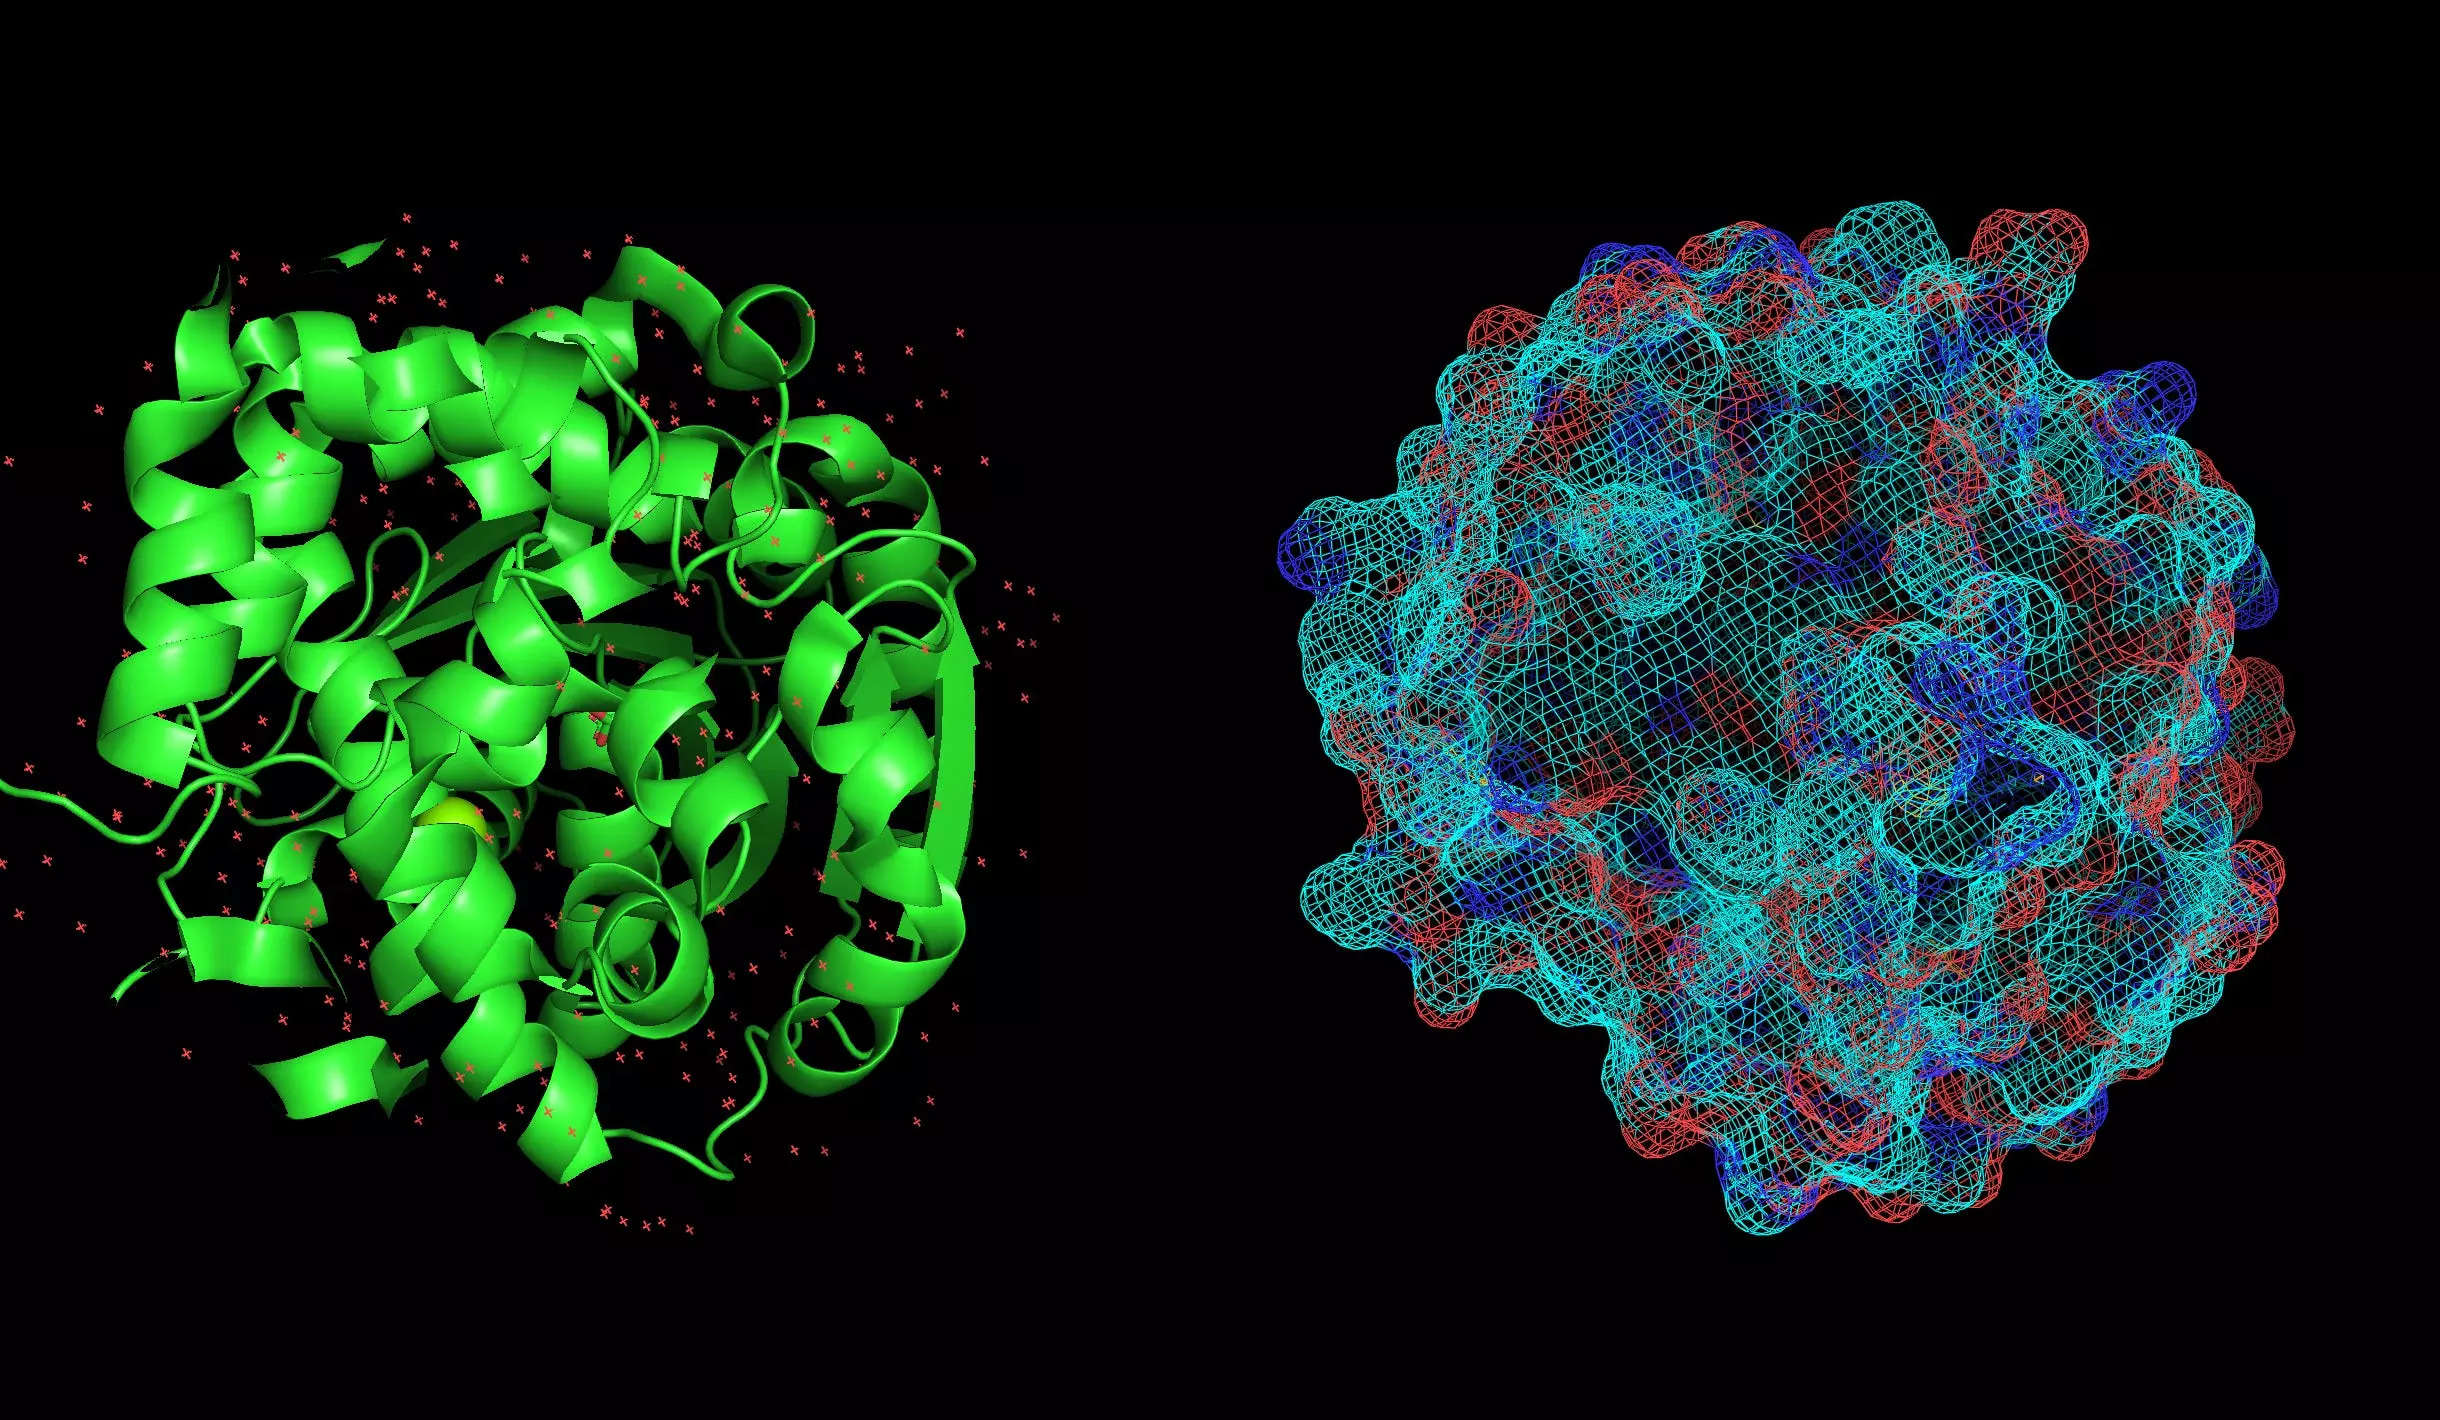 Visualisation of proteins in silico, made by Saif Ur-Rehman, Basecamp Research